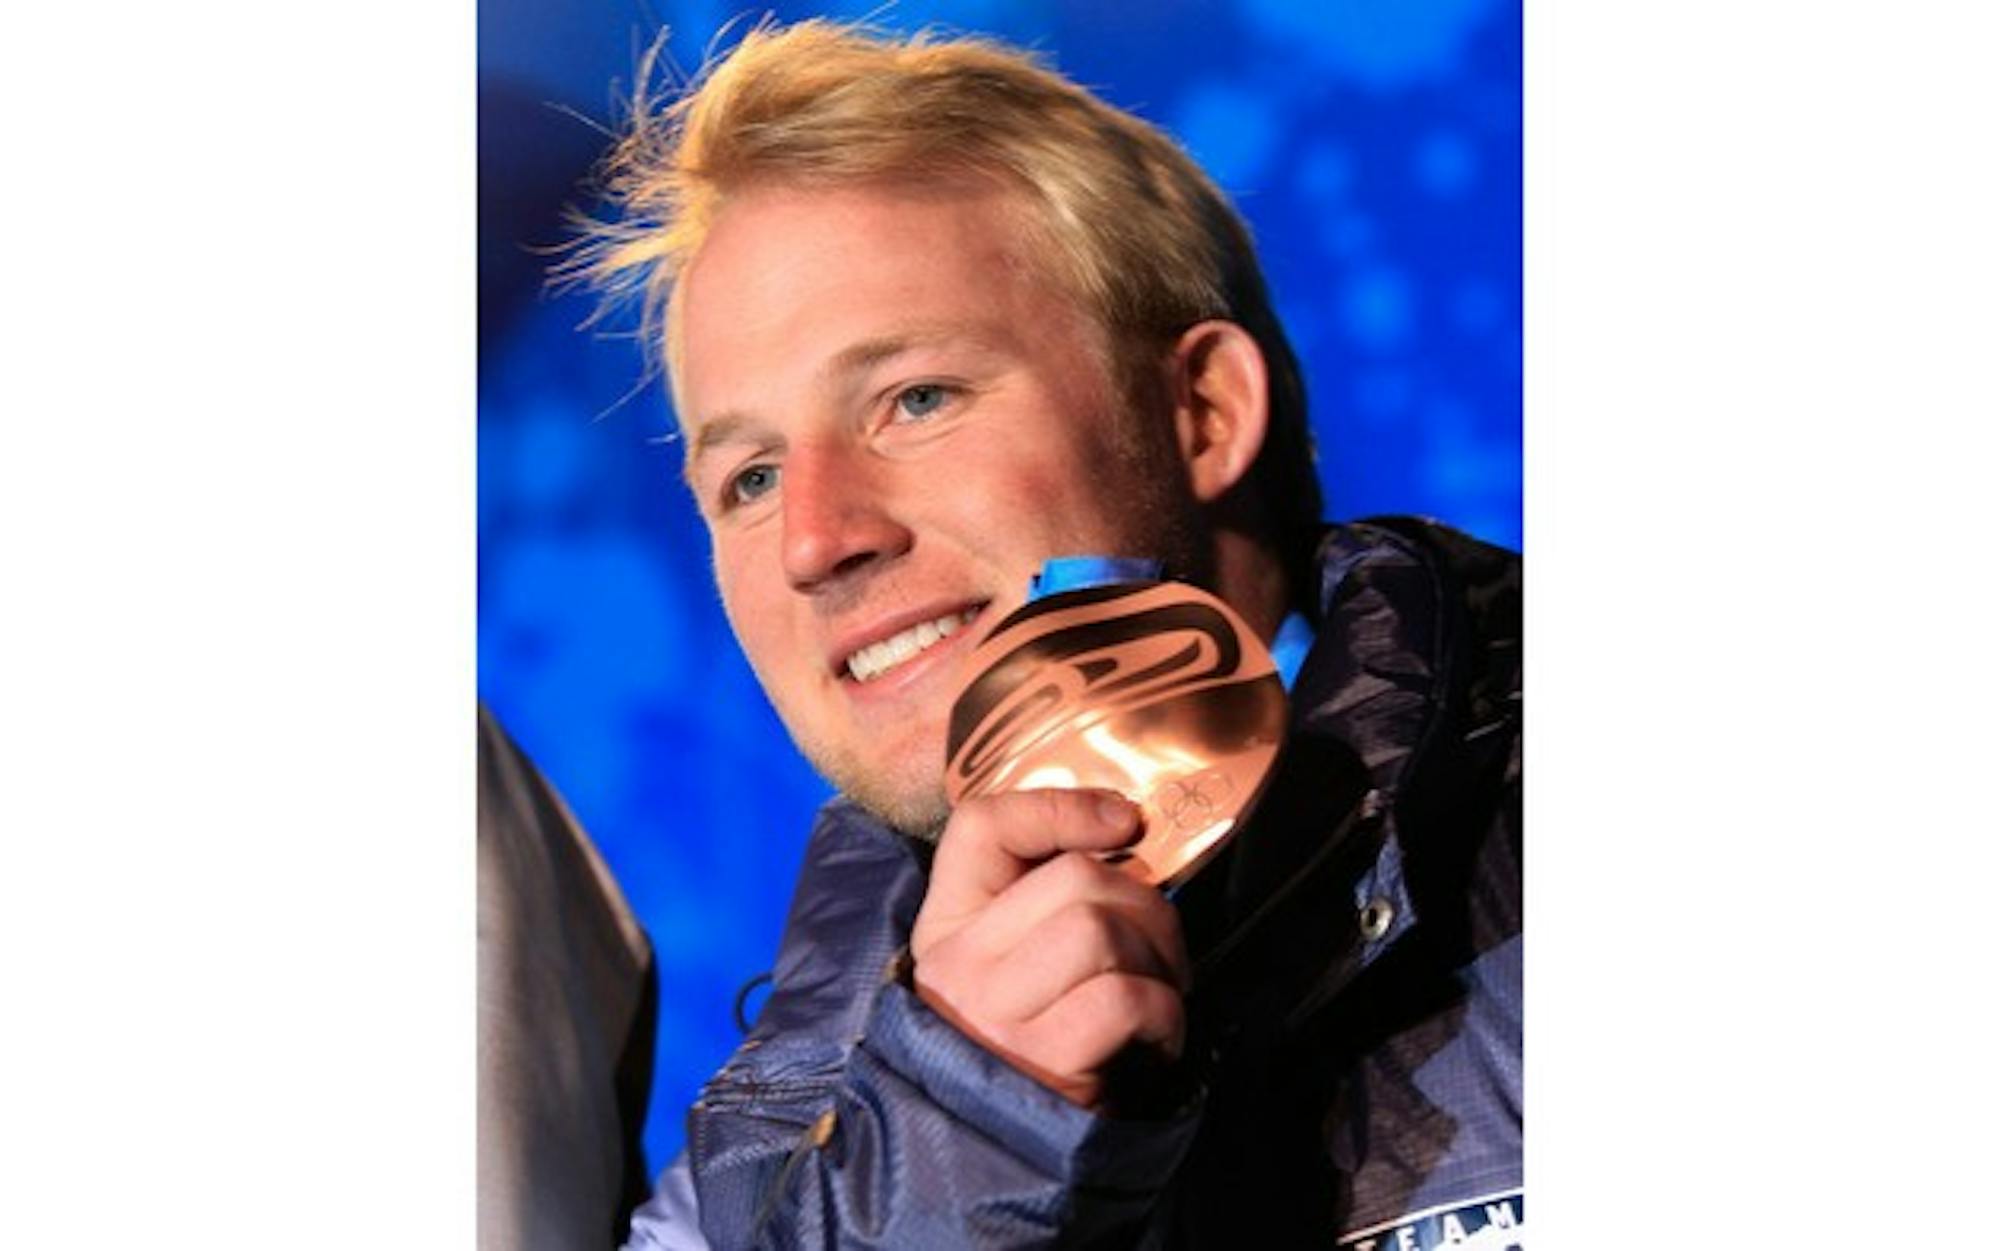 Andrew Weibrecht '09 placed third in the Super G competition at the Winter Olympic Games In Vancouver.